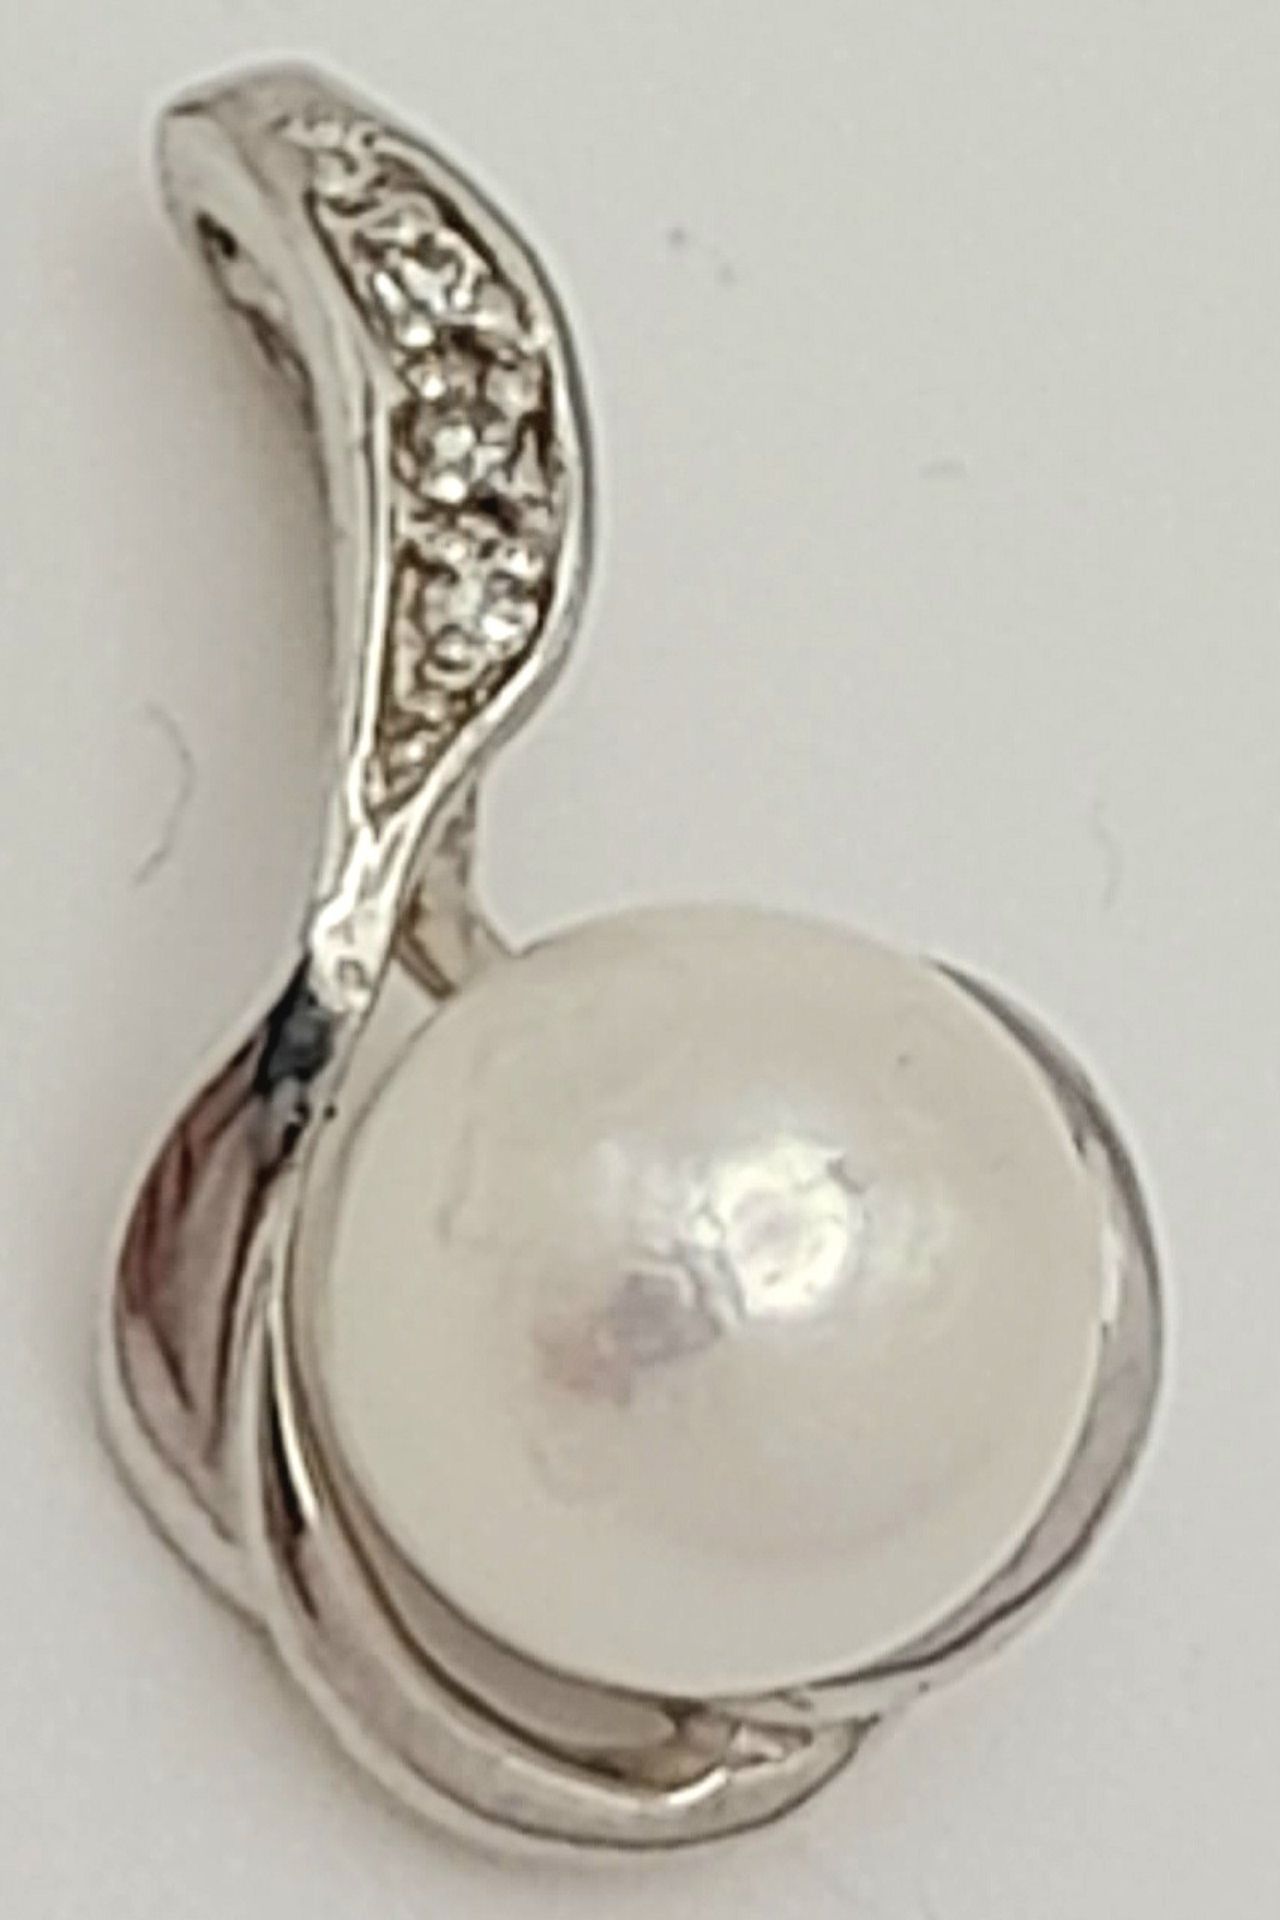 A 9ct White Gold Diamond and Pearl Pendant, 6mm pearl size, 0.02ct diamond, 0.9g weight, approx 15mm